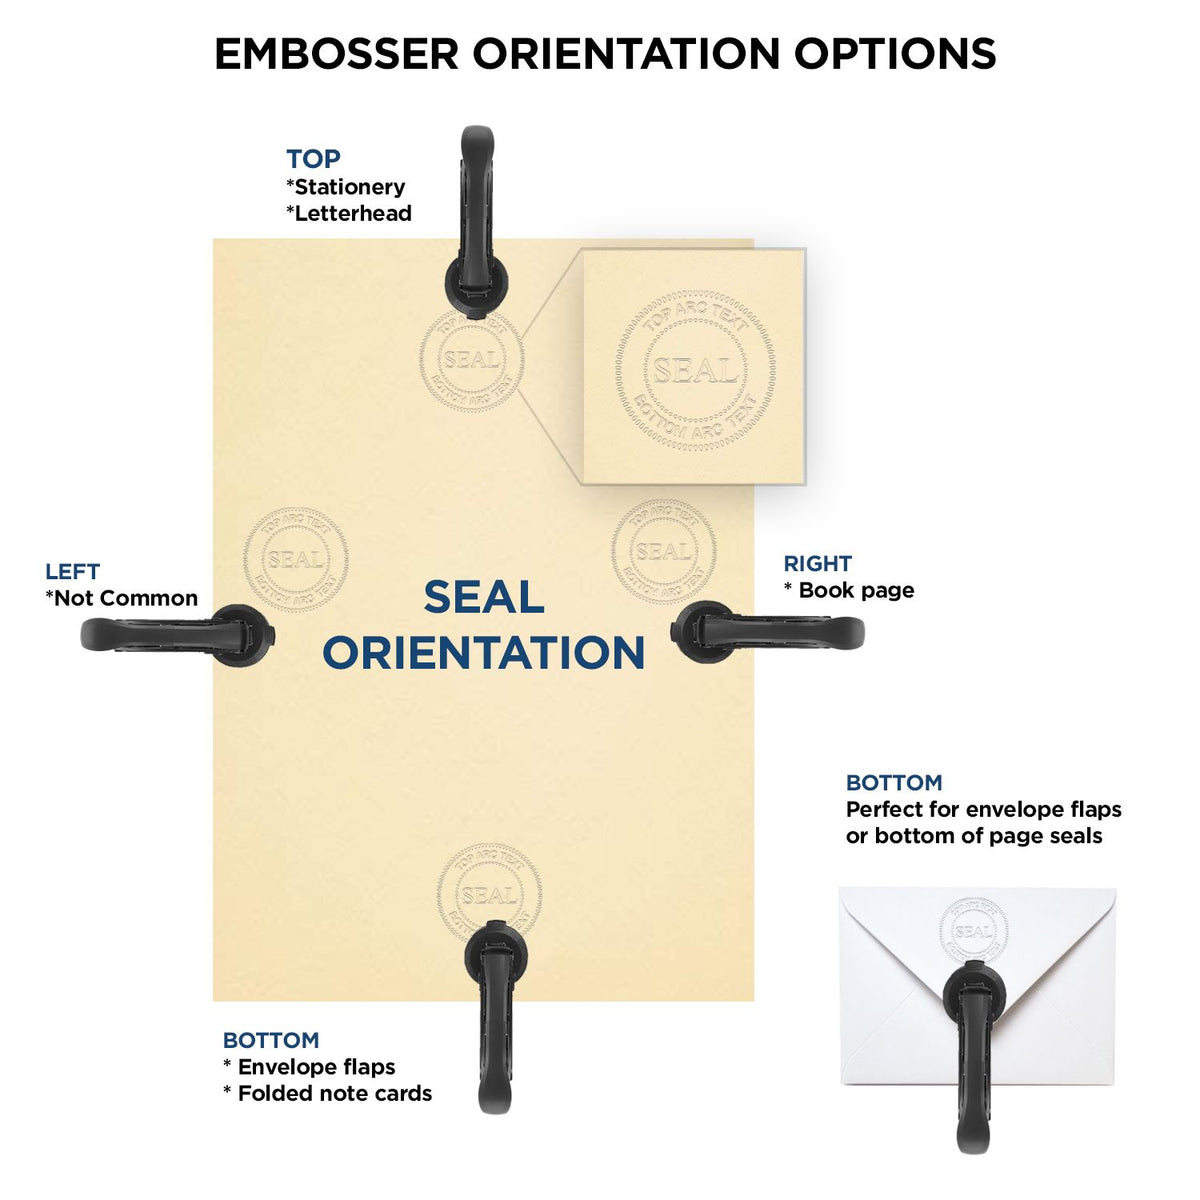 An infographic for the Handheld New Mexico Architect Seal Embosser showing embosser orientation, this is showing examples of a top, bottom, right and left insert.